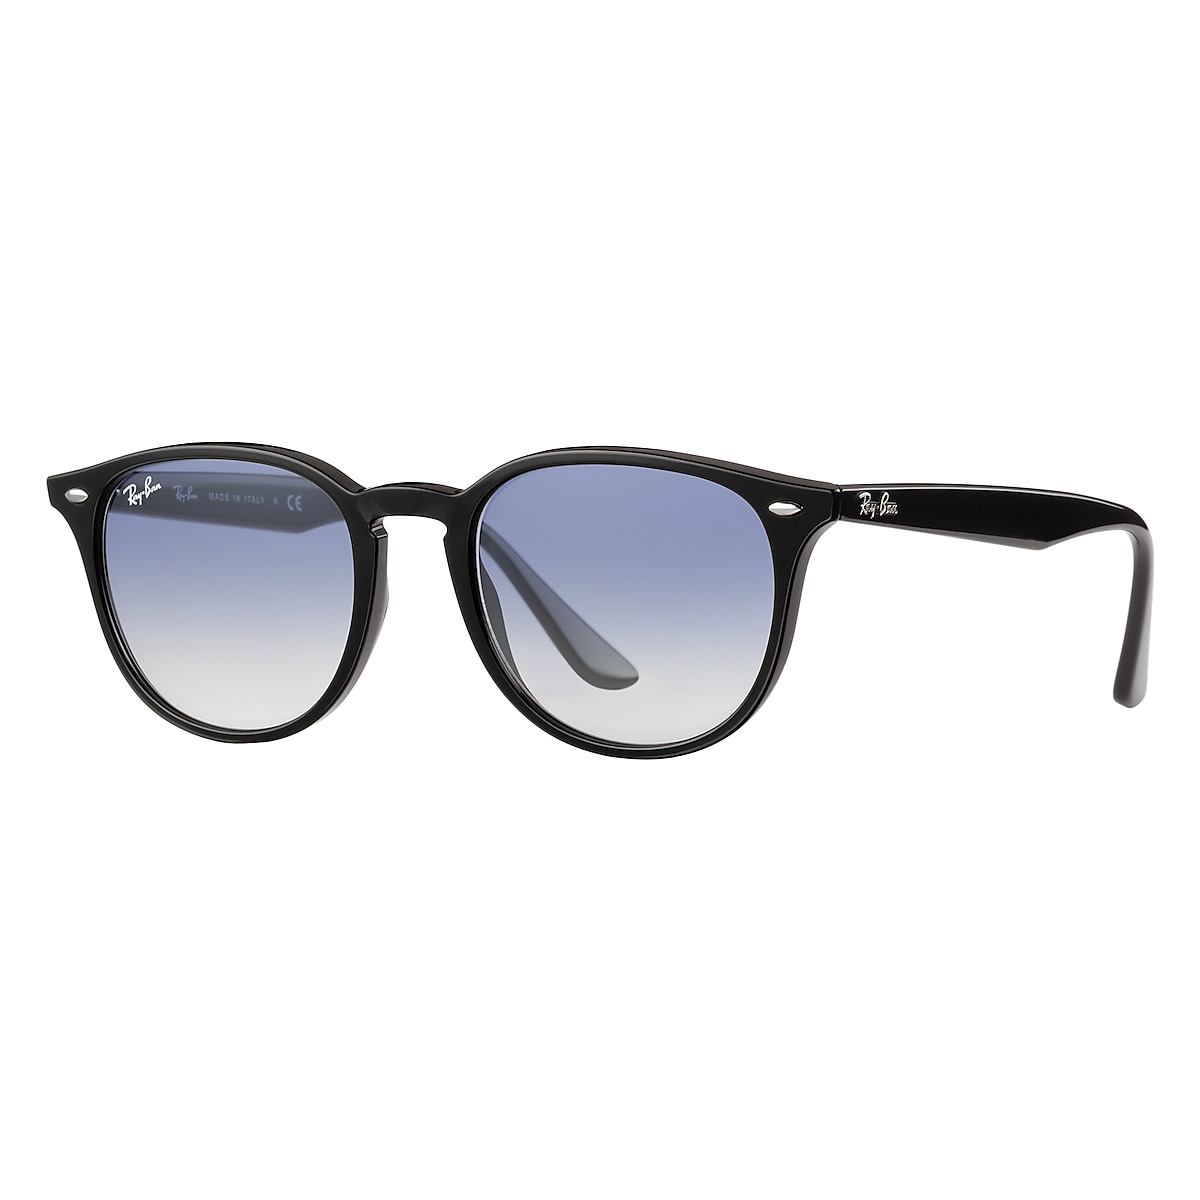 RB4259 Sunglasses in Black and Light Blue - RB4259F | Ray-Ban® US